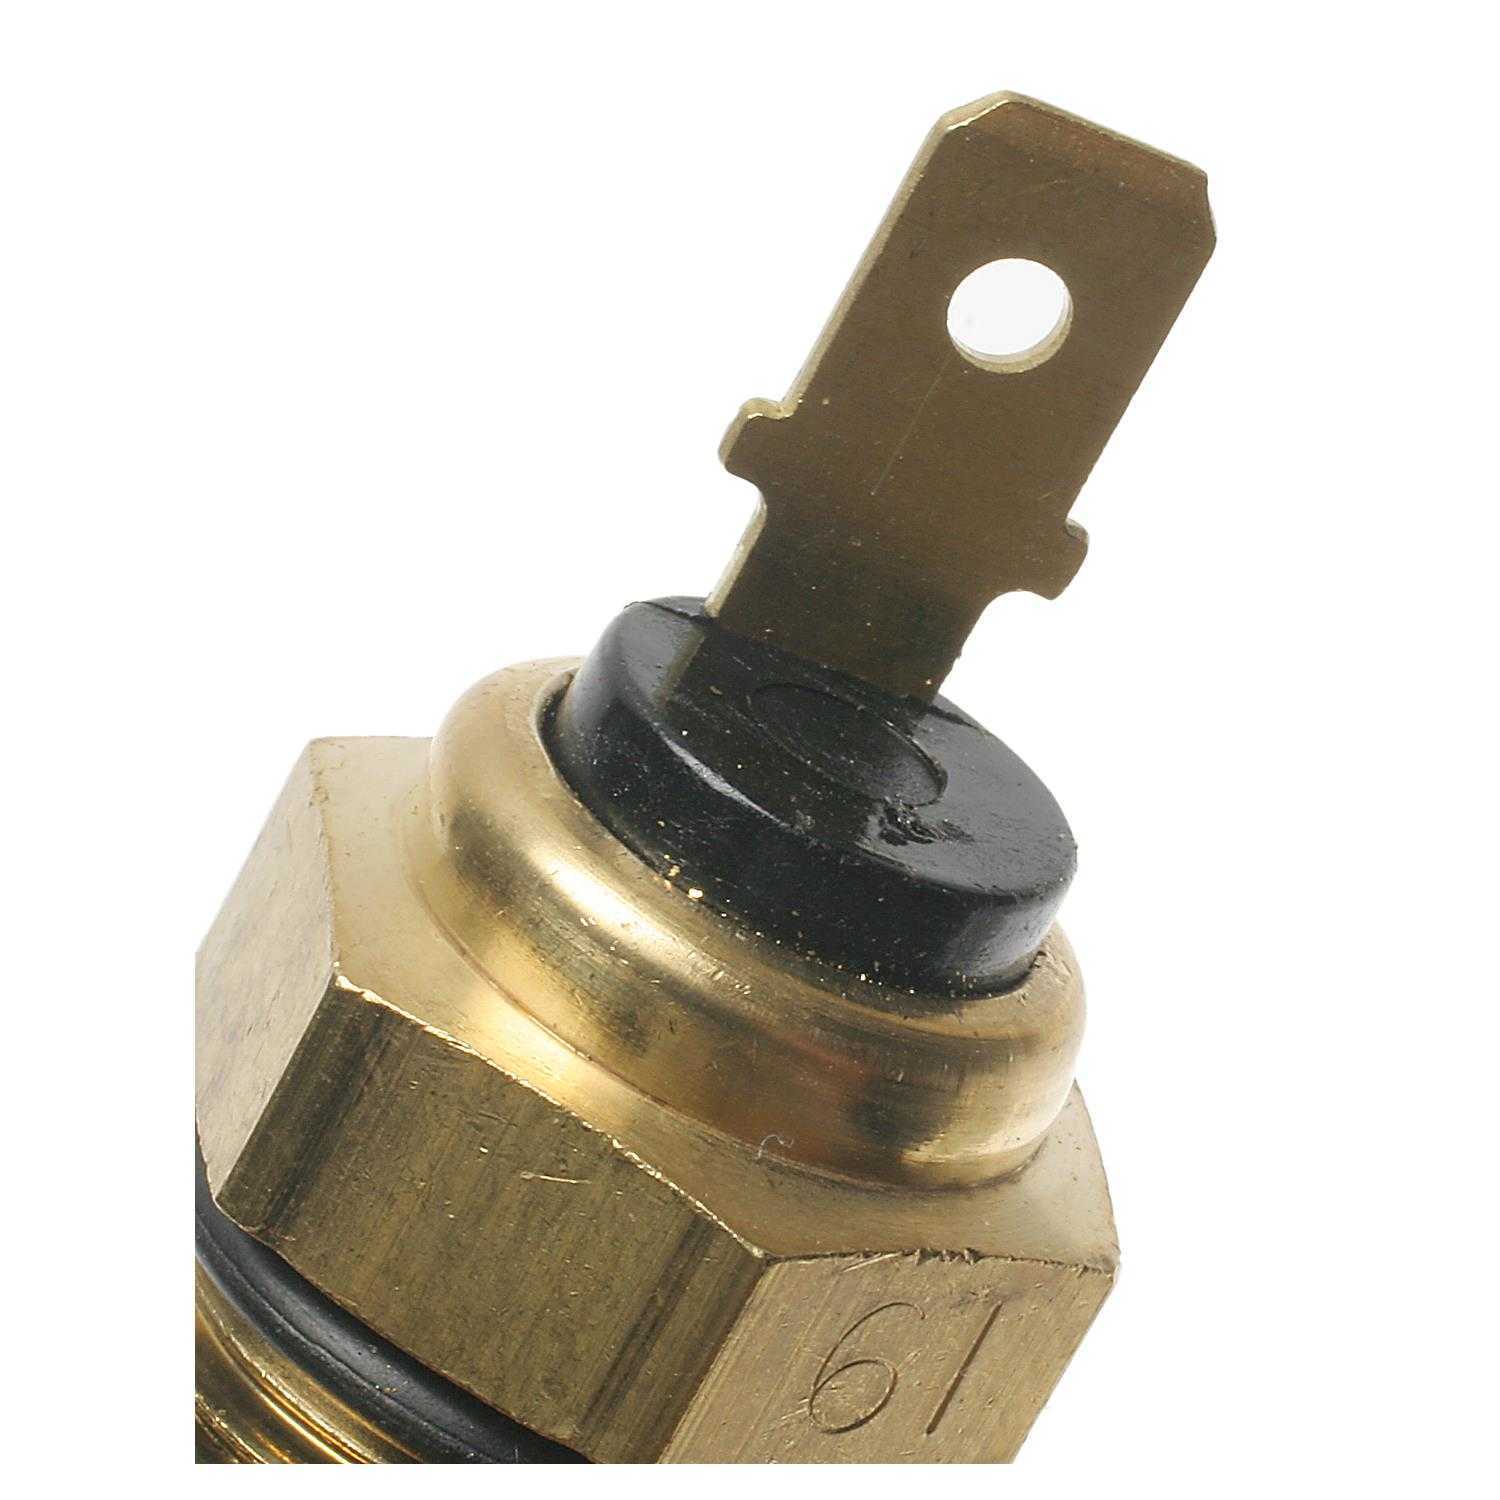 STANDARD MOTOR PRODUCTS - Engine Coolant Temperature Sender - STA TS-61